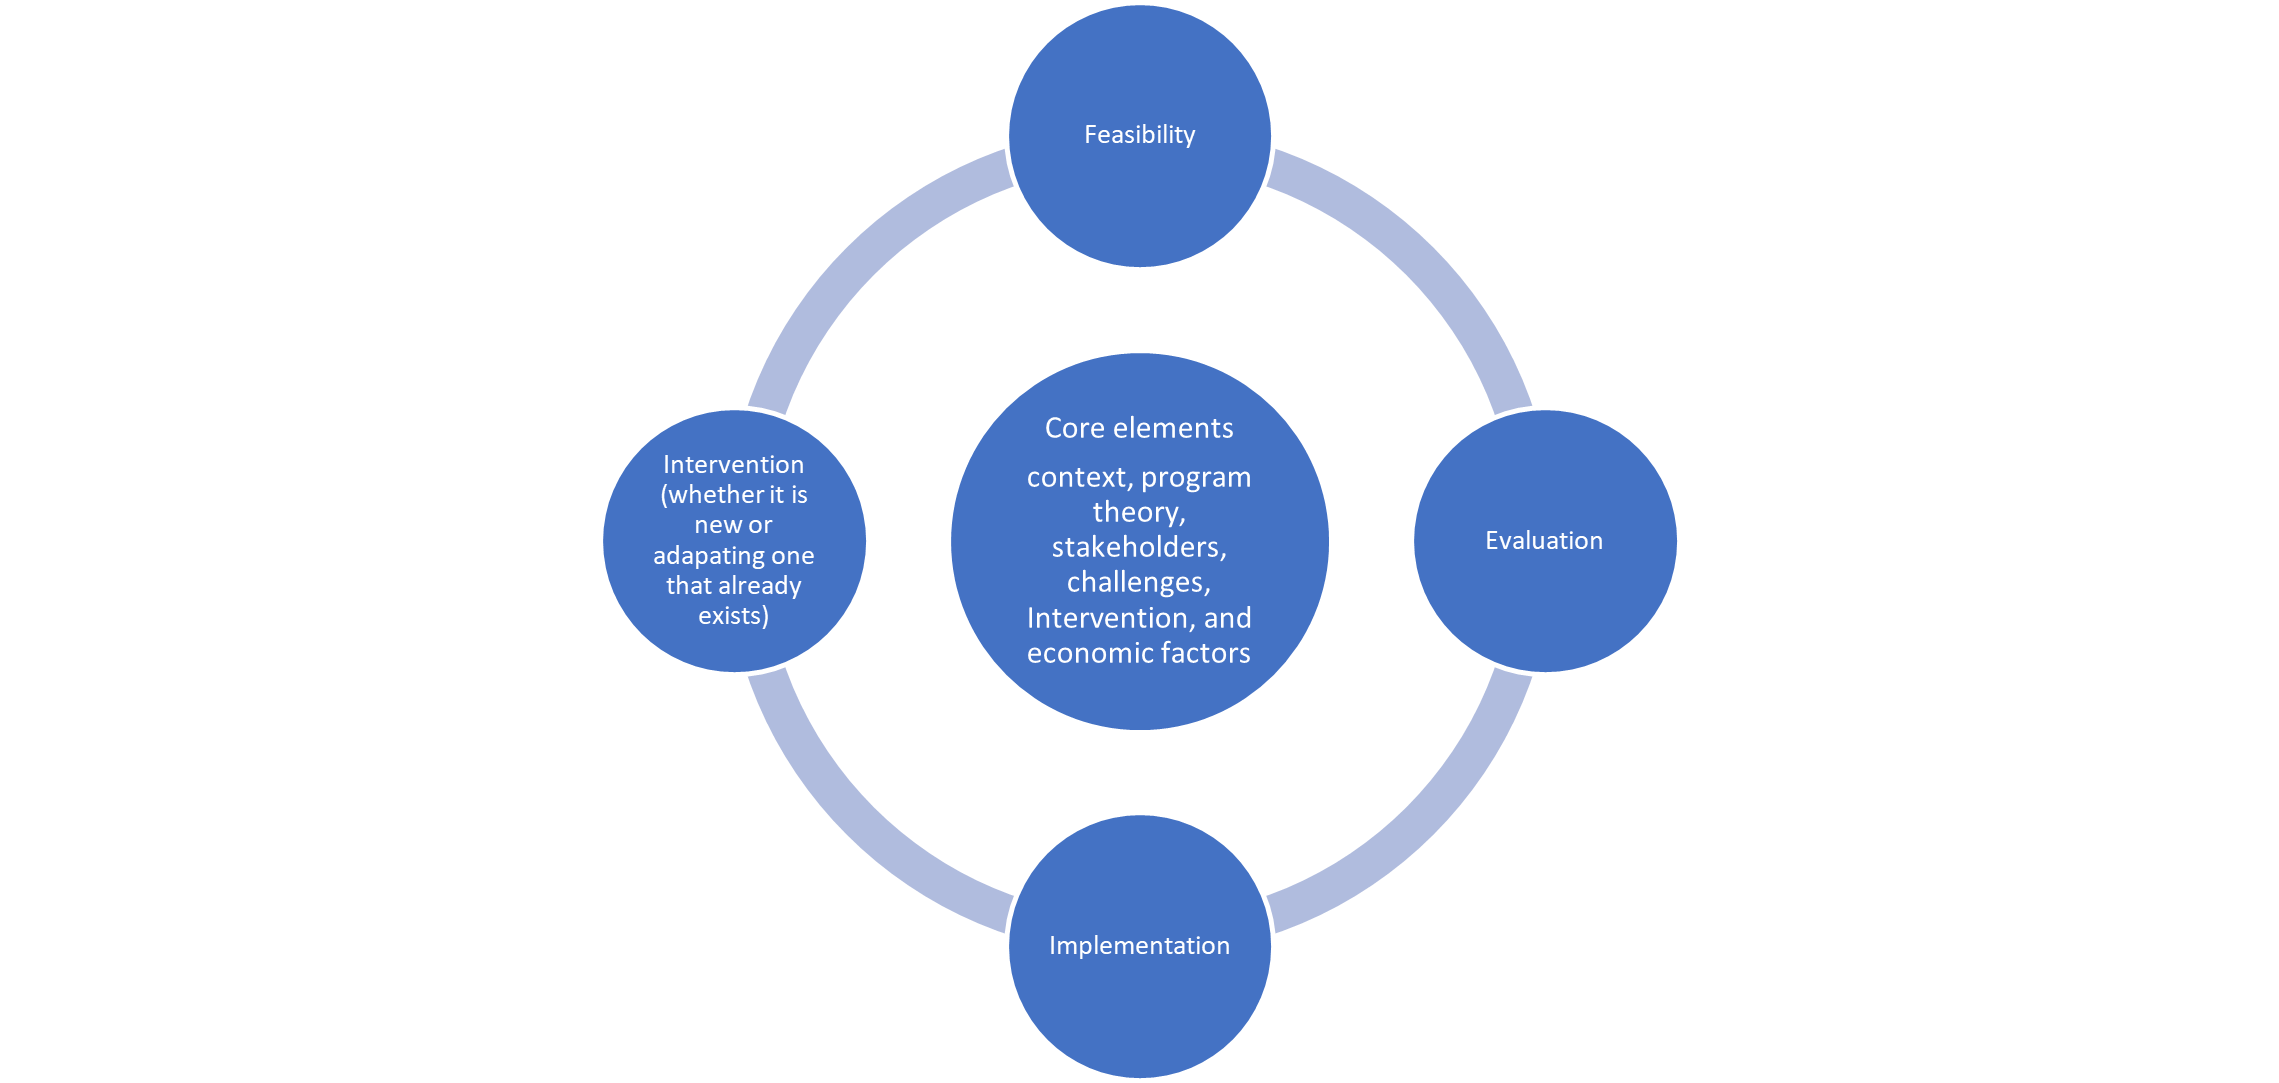 This diagram shows a framework for implementation with the core elements of context, program theory, involvement of stakeholders, choice of intervention and economic factors.